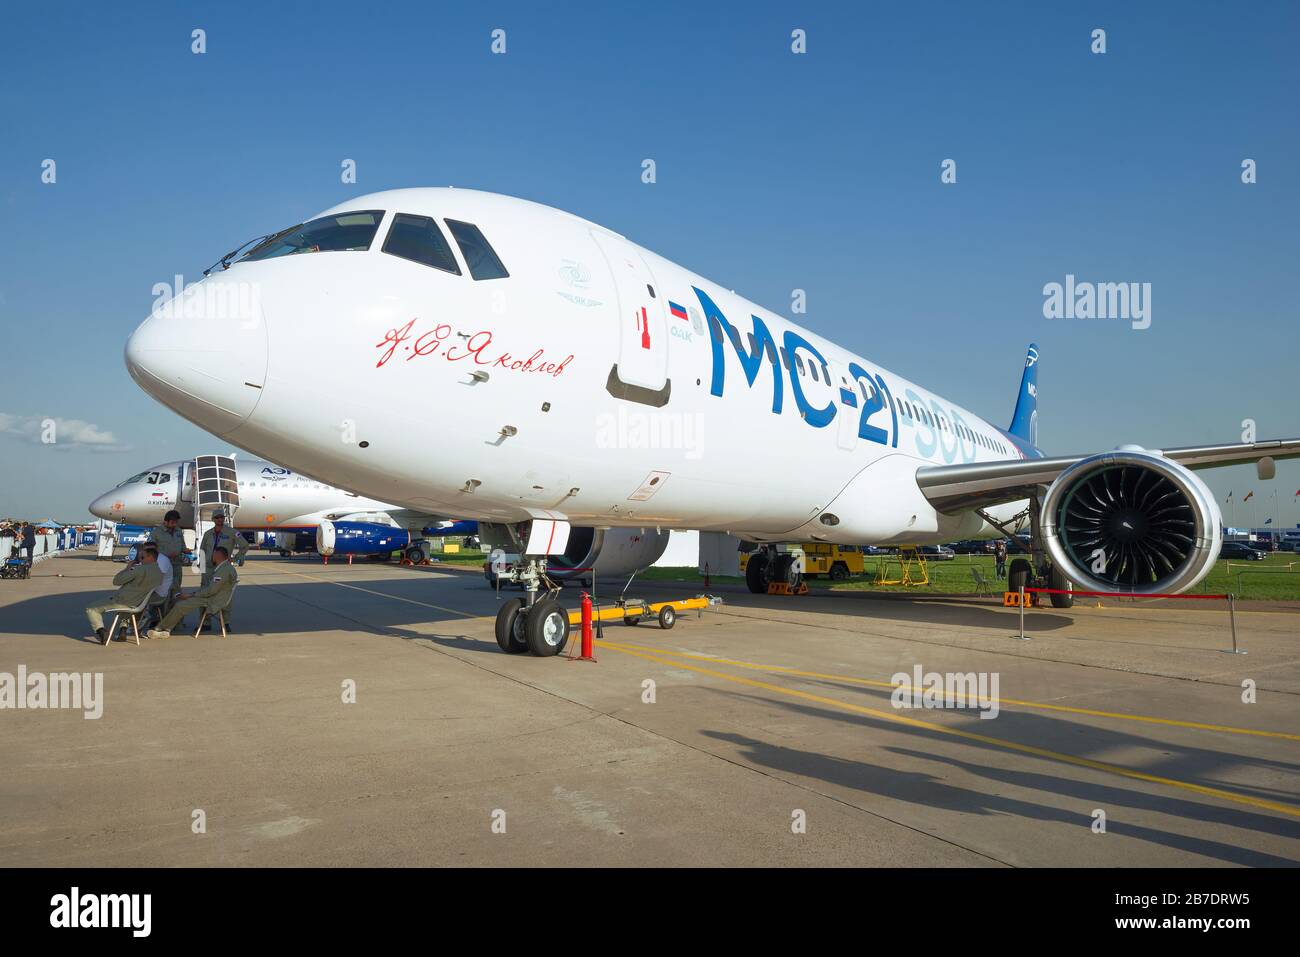 ZHUKOVSKY, RUSSIA - AUGUST 30, 2019: Russian medium-range narrow-body passenger aircraft MS-21 takes part in the MAKS-2019 air show Stock Photo